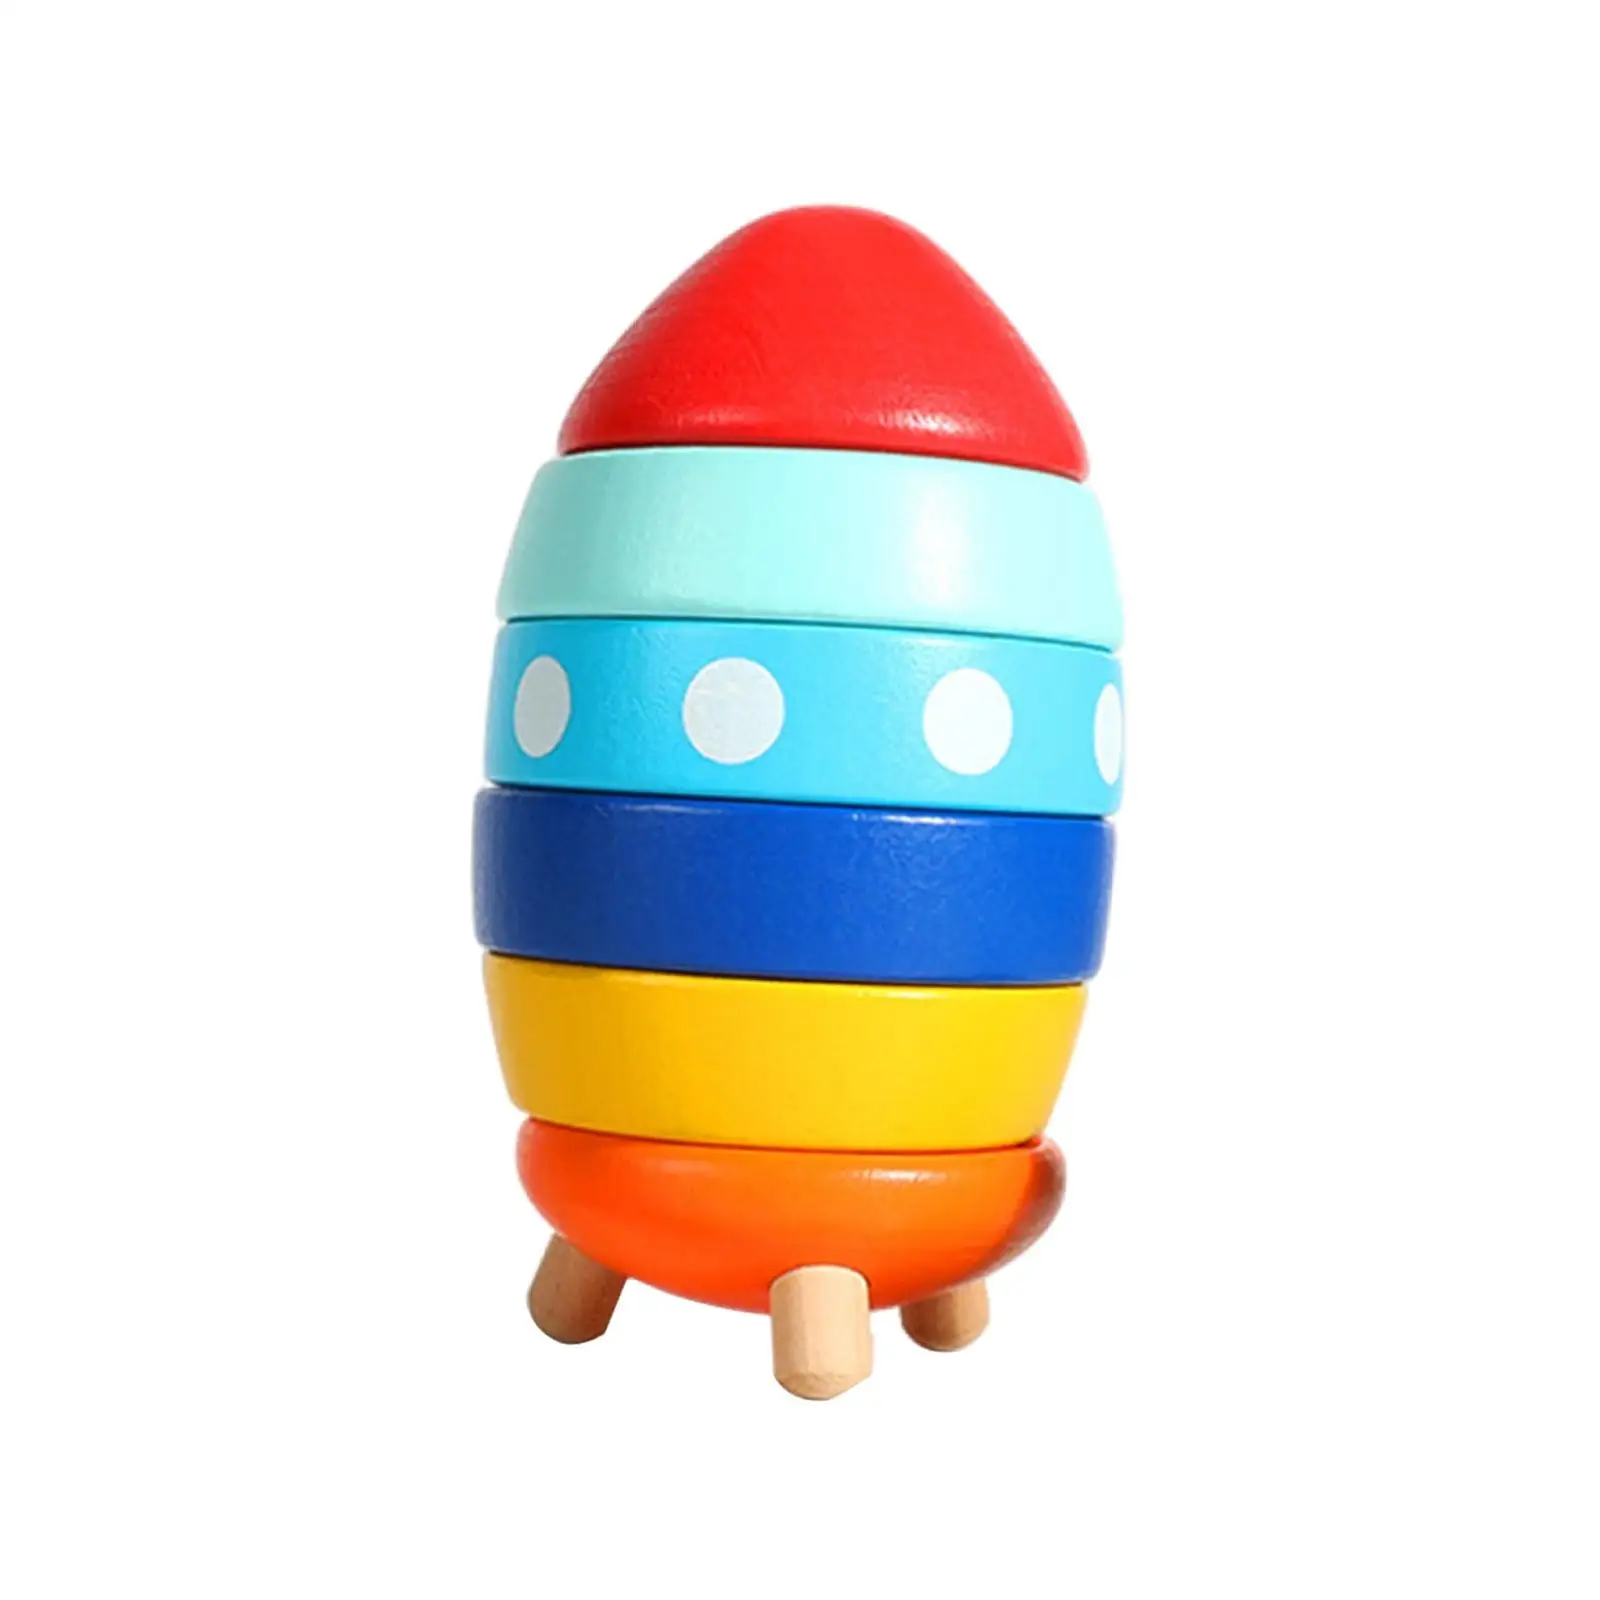 Montessori Wooden Colorful Rocket Shaped Stacking Toys Educational Toys Puzzle for Children Boys and Girls Kids